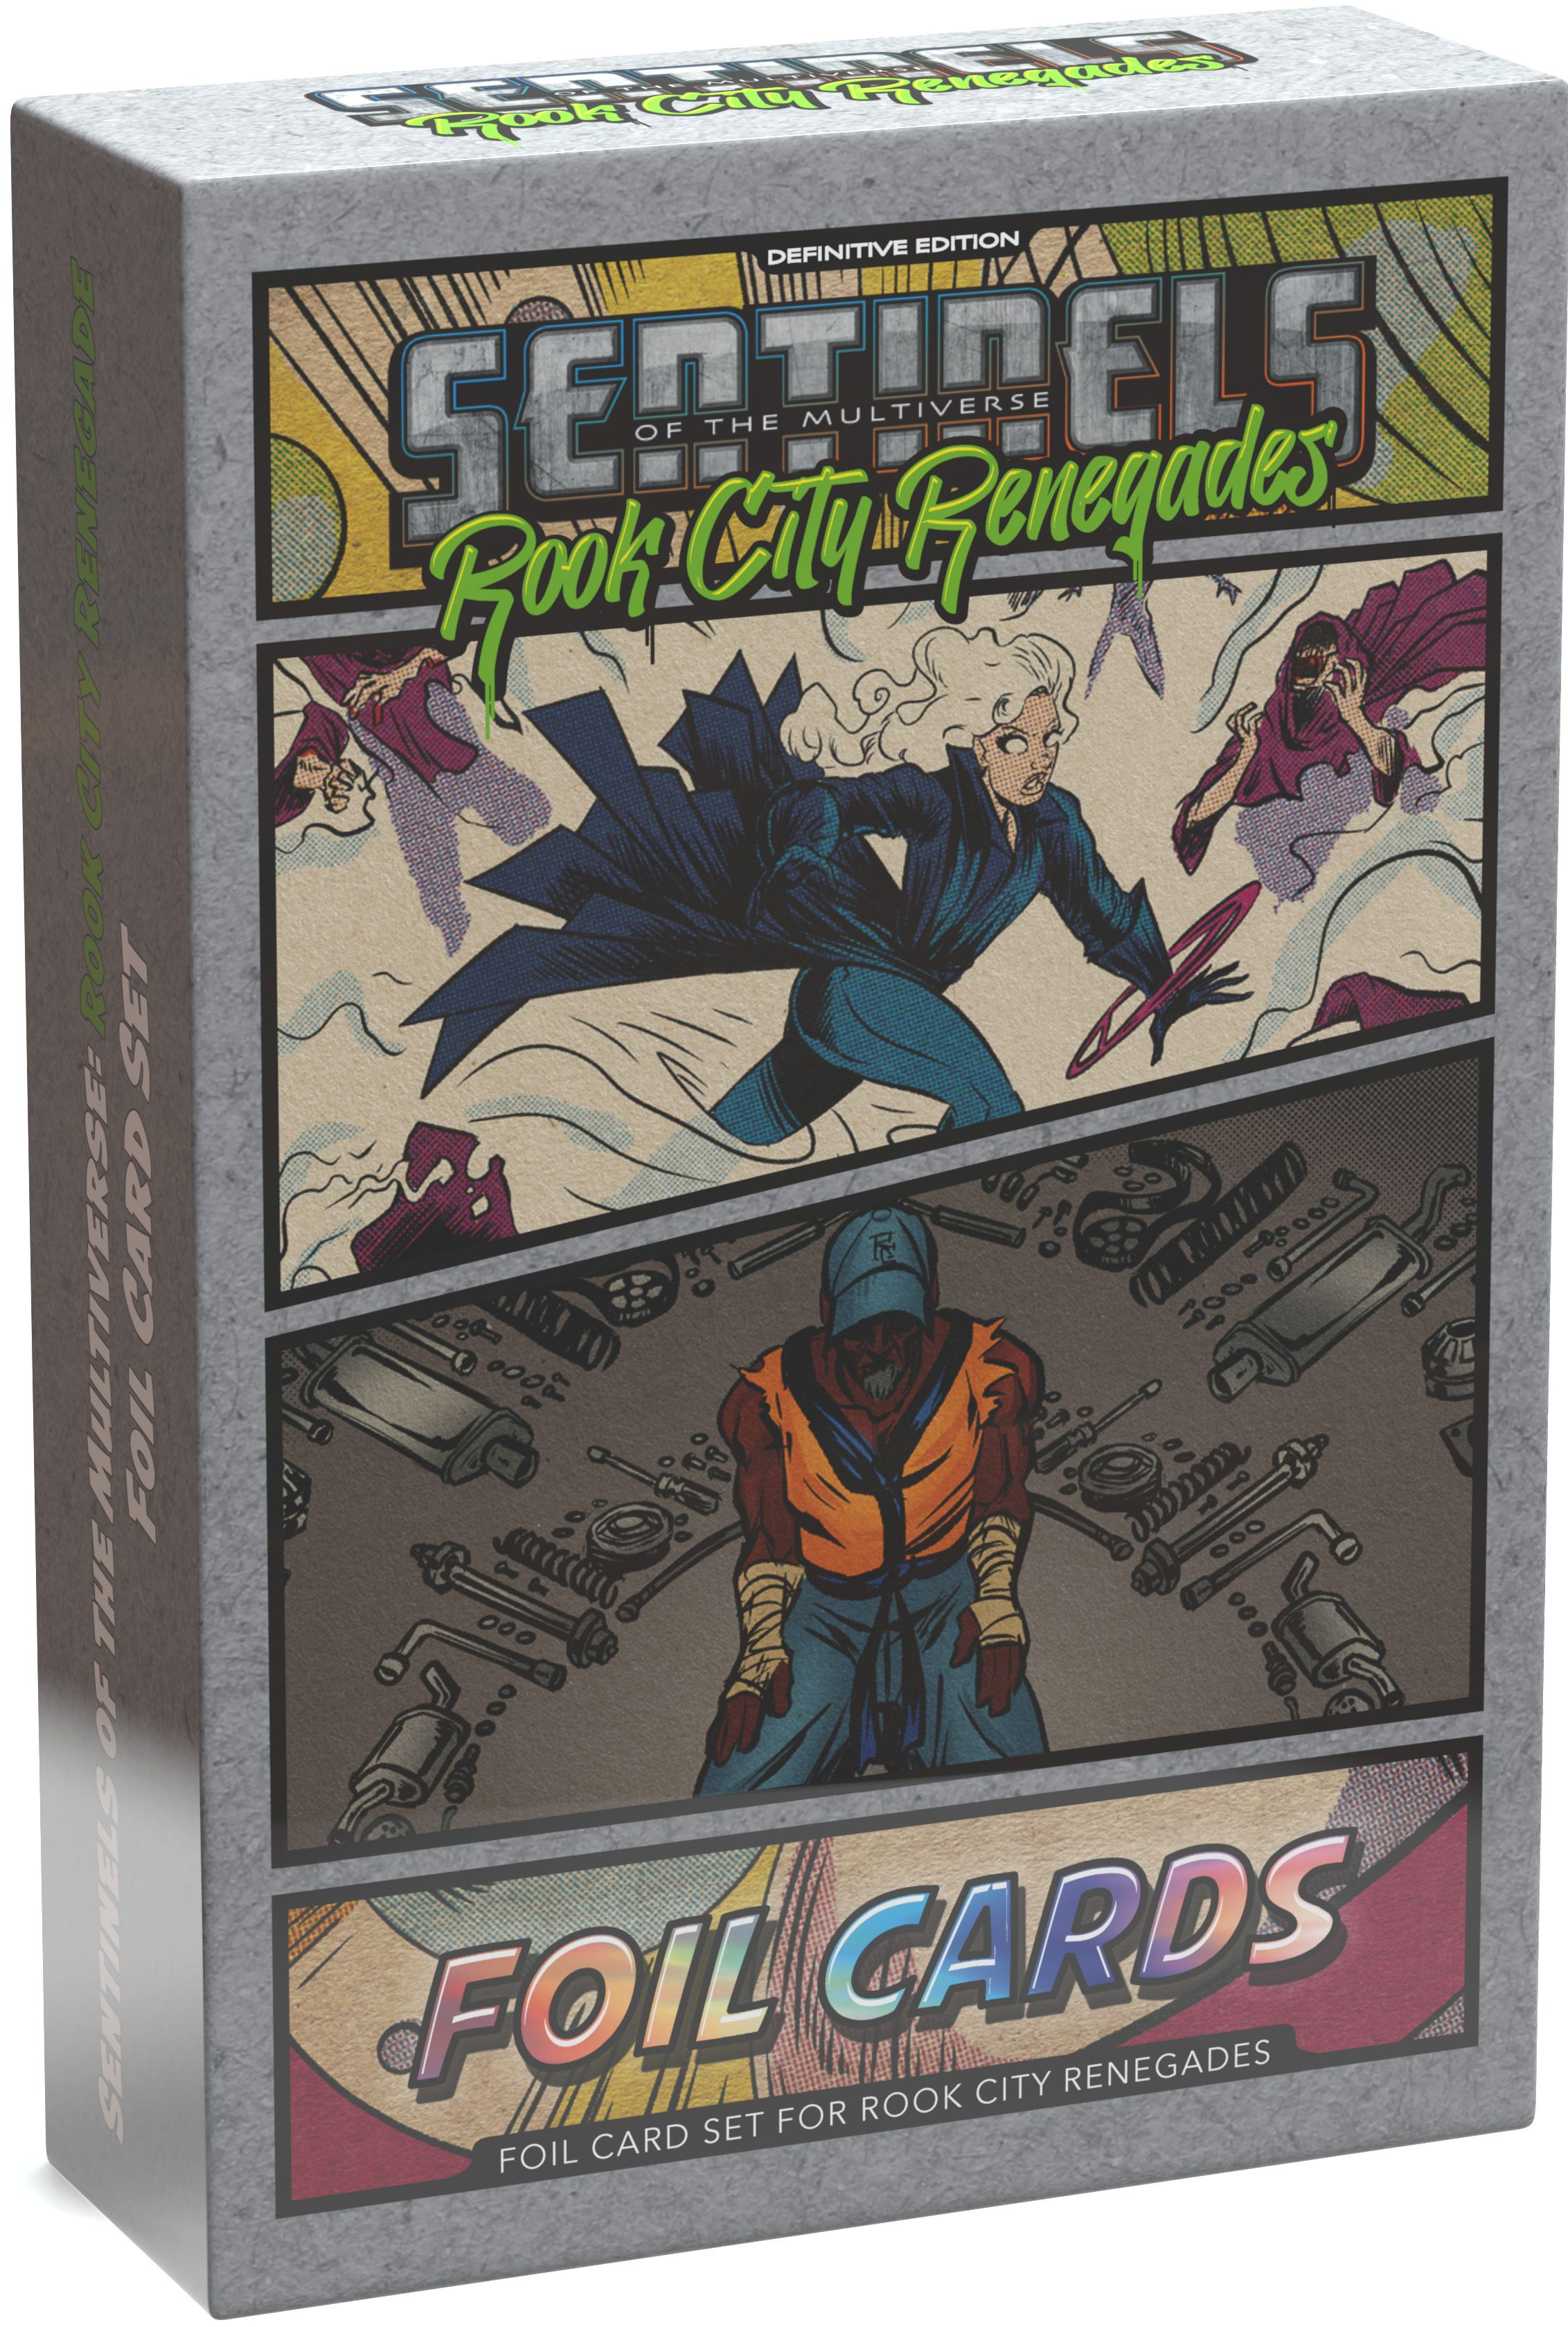 Sentinels of the Multiverse: Definitive Edition: Rook City Renegades (Foil Cards) 